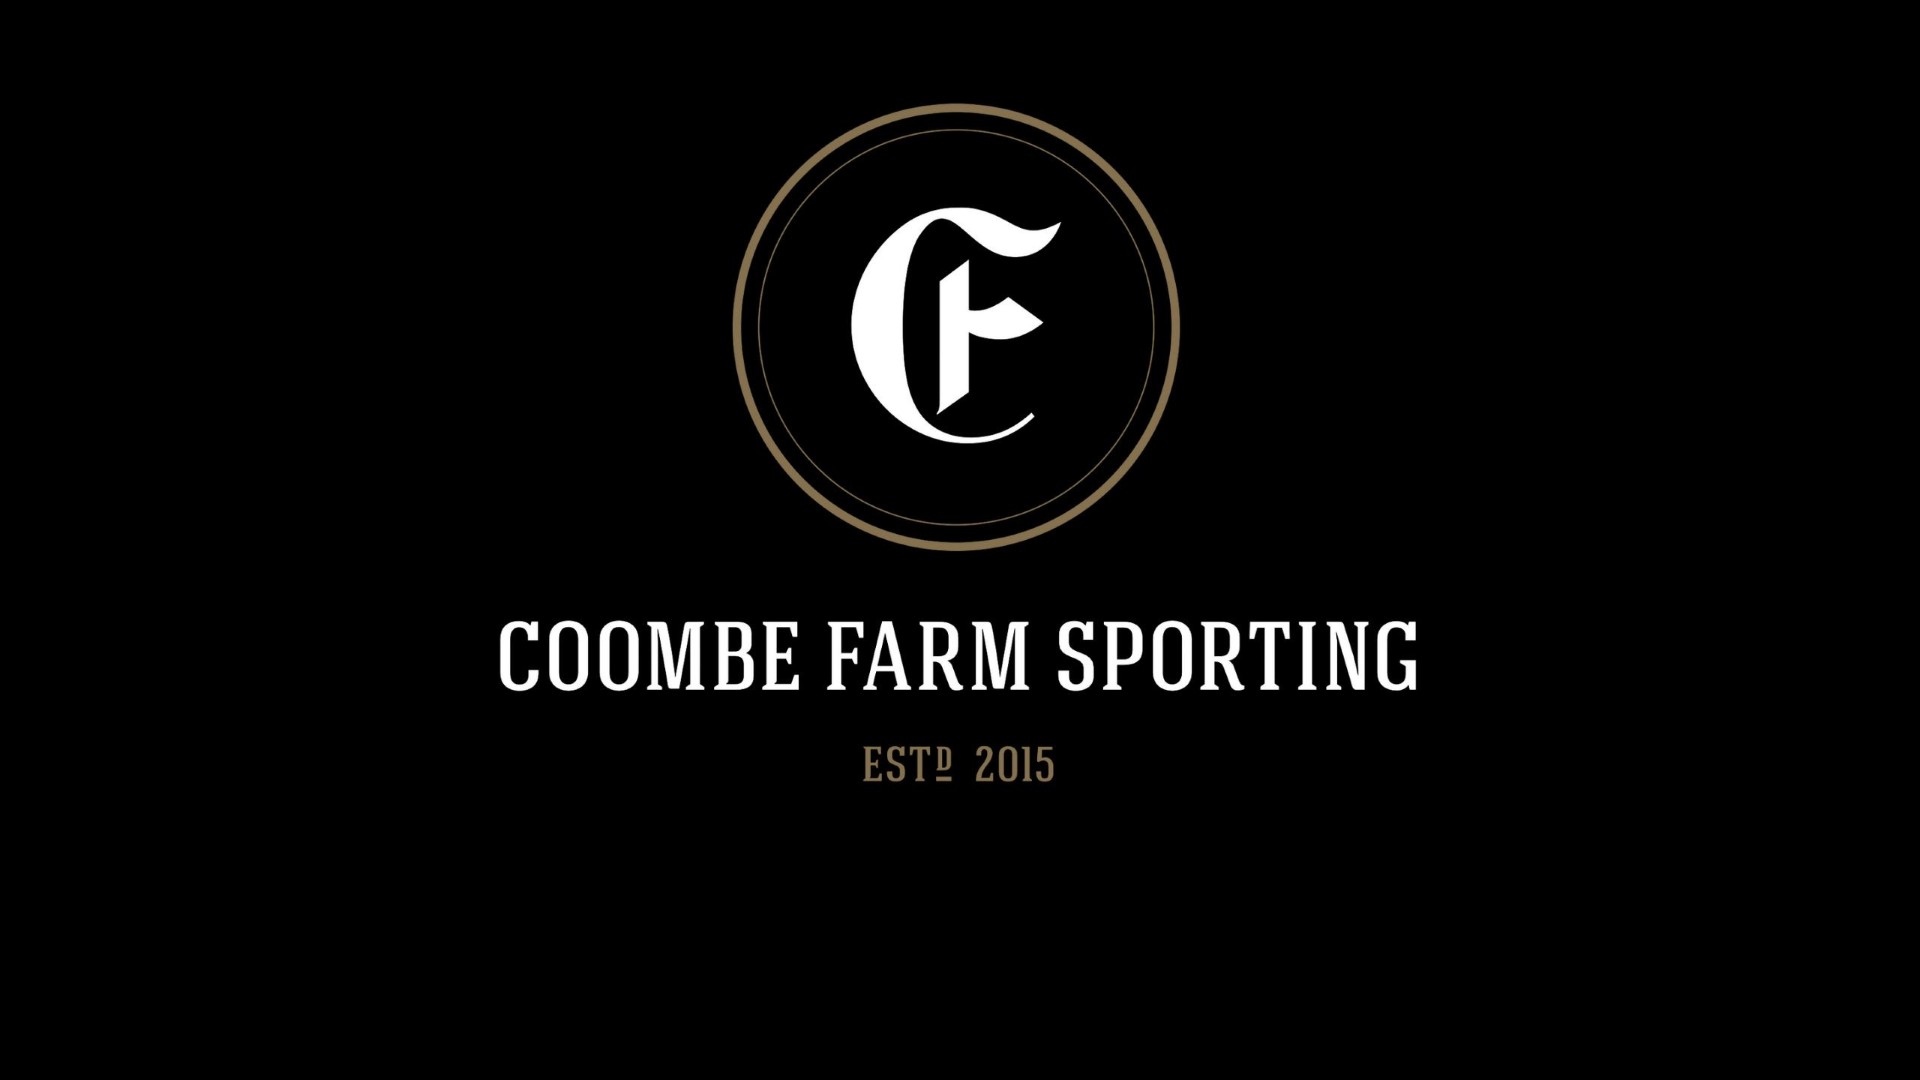 Coombe Farm Sporting